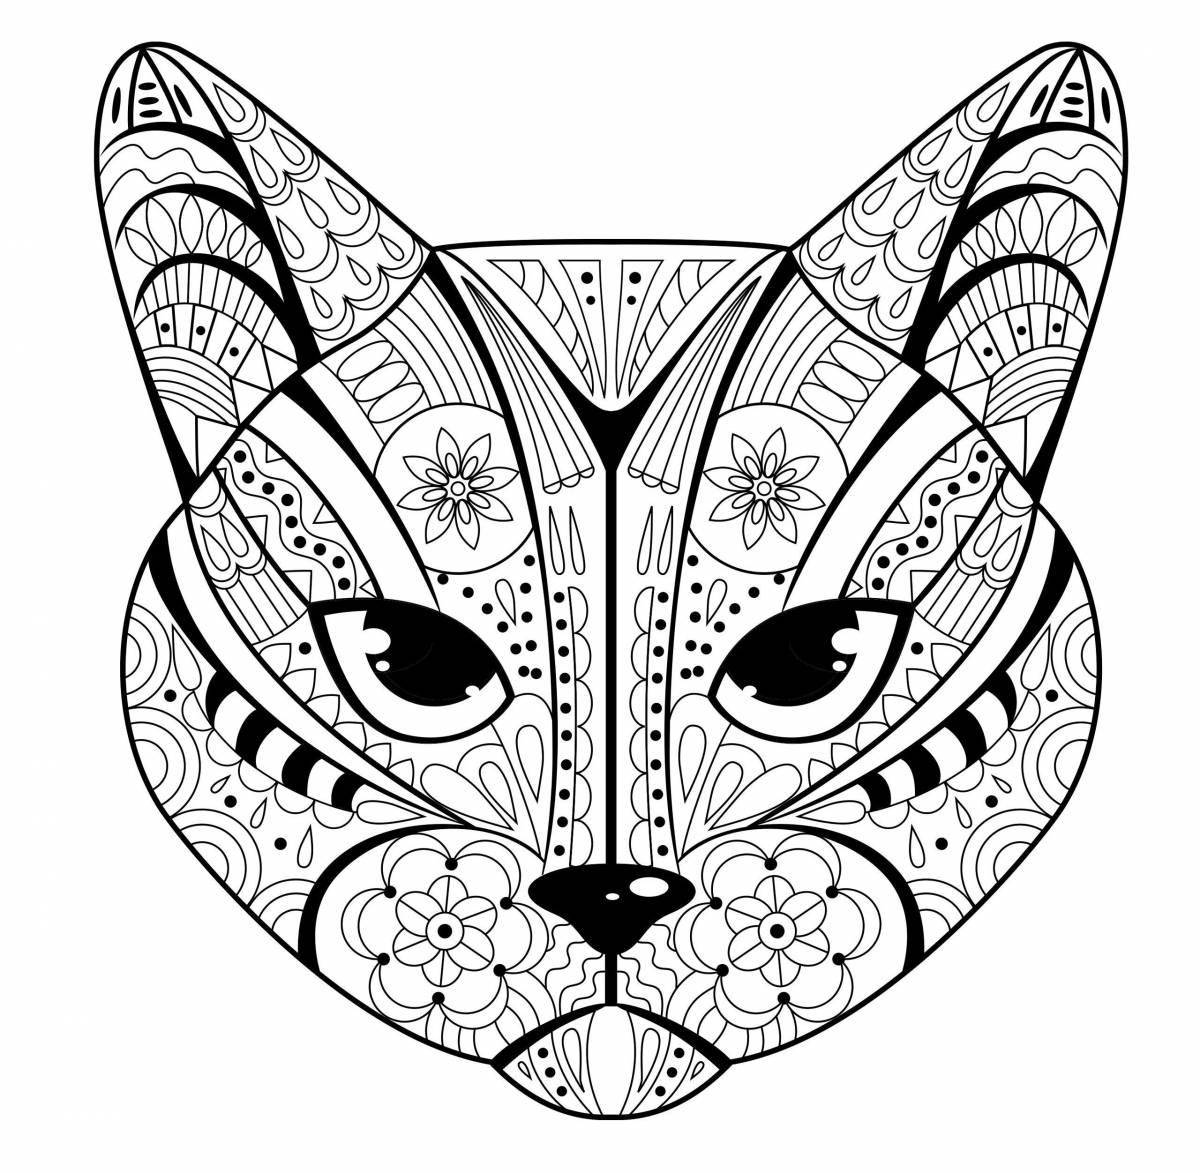 Colourful cat face coloring page